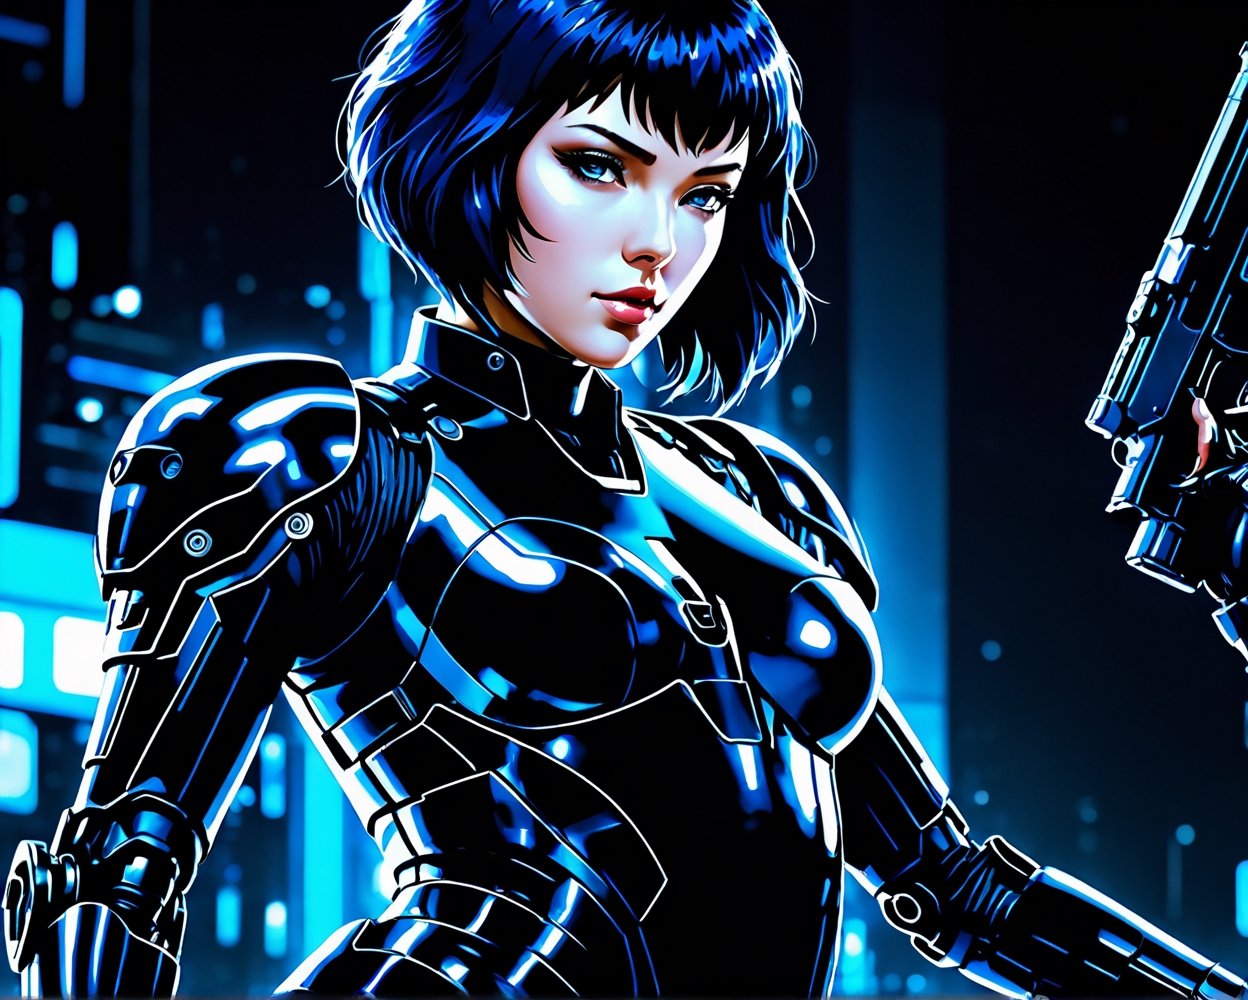 Ghost in the Shell Vol.2, a woman in a futuristic suit holding a gun and a robot, ghost in the shell art style, by Luis Duarte, Luis Duarte style, blue and black shading, Neo-Tokyo style, Element Air, Mythpunk, Graphic Interface, Sci-Fic Art, Dark Influence, NijiExpress 3D v3, Kinetic Art, Datanoshing, Oilpainting, Ink v3, Cyber Tech Elements, Futuristic, Illustrated v3, anime style, Hyperrealism, high detail, Futurism, award winning, super detail, textured skin, highres, HD, 4K, 8k, 16k,Movie Still